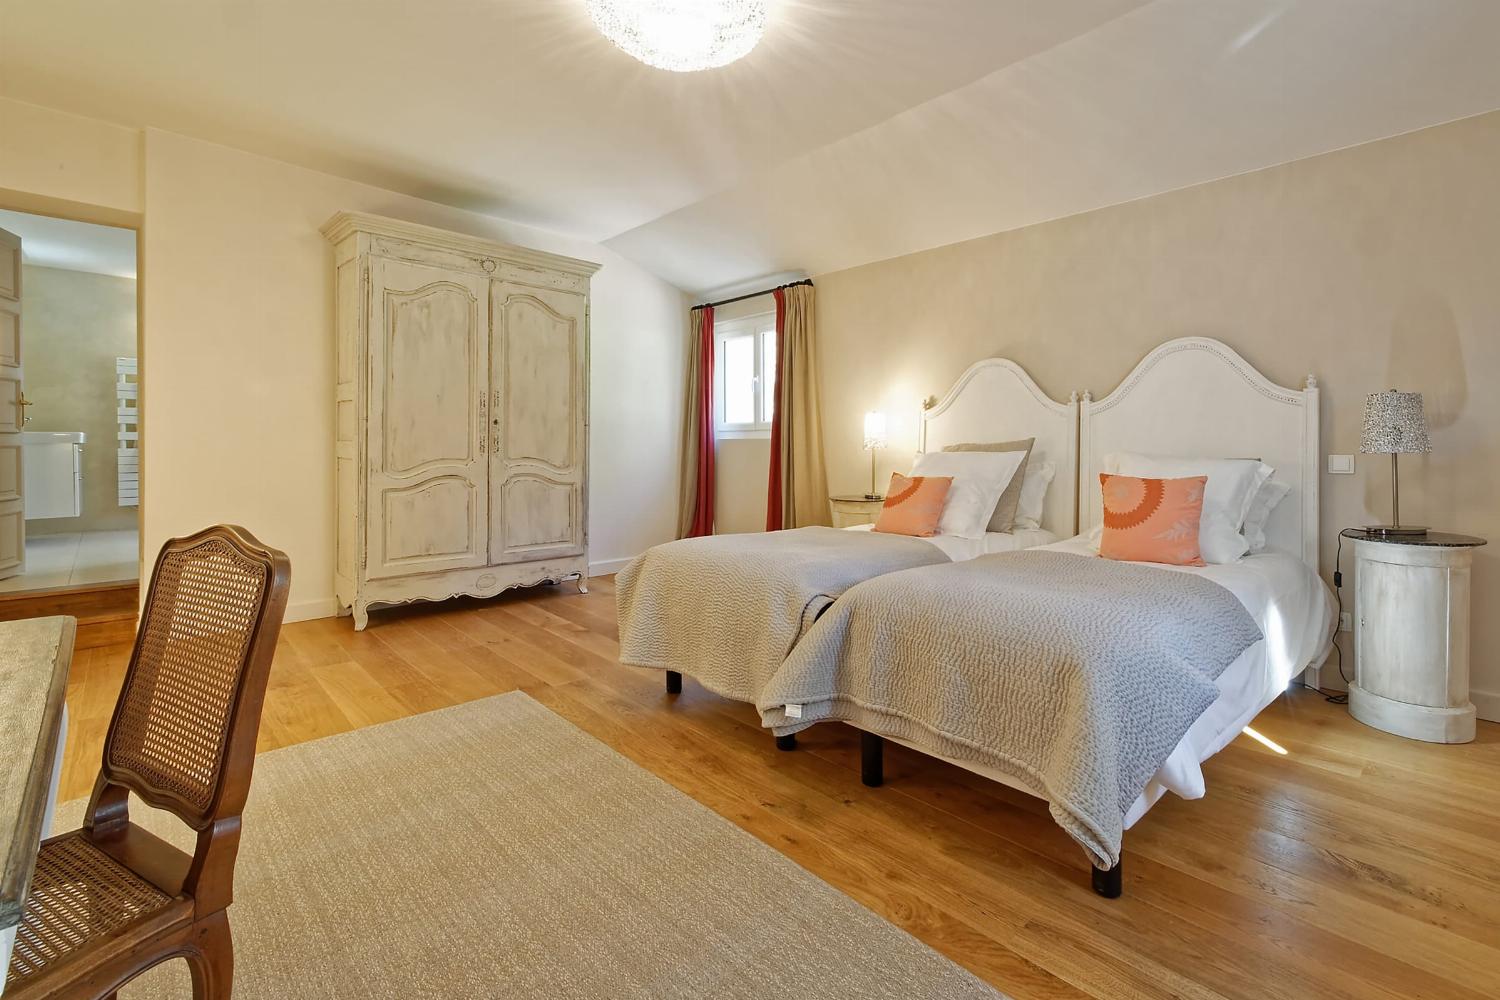 Bedroom | Vacation accommodation in Provence